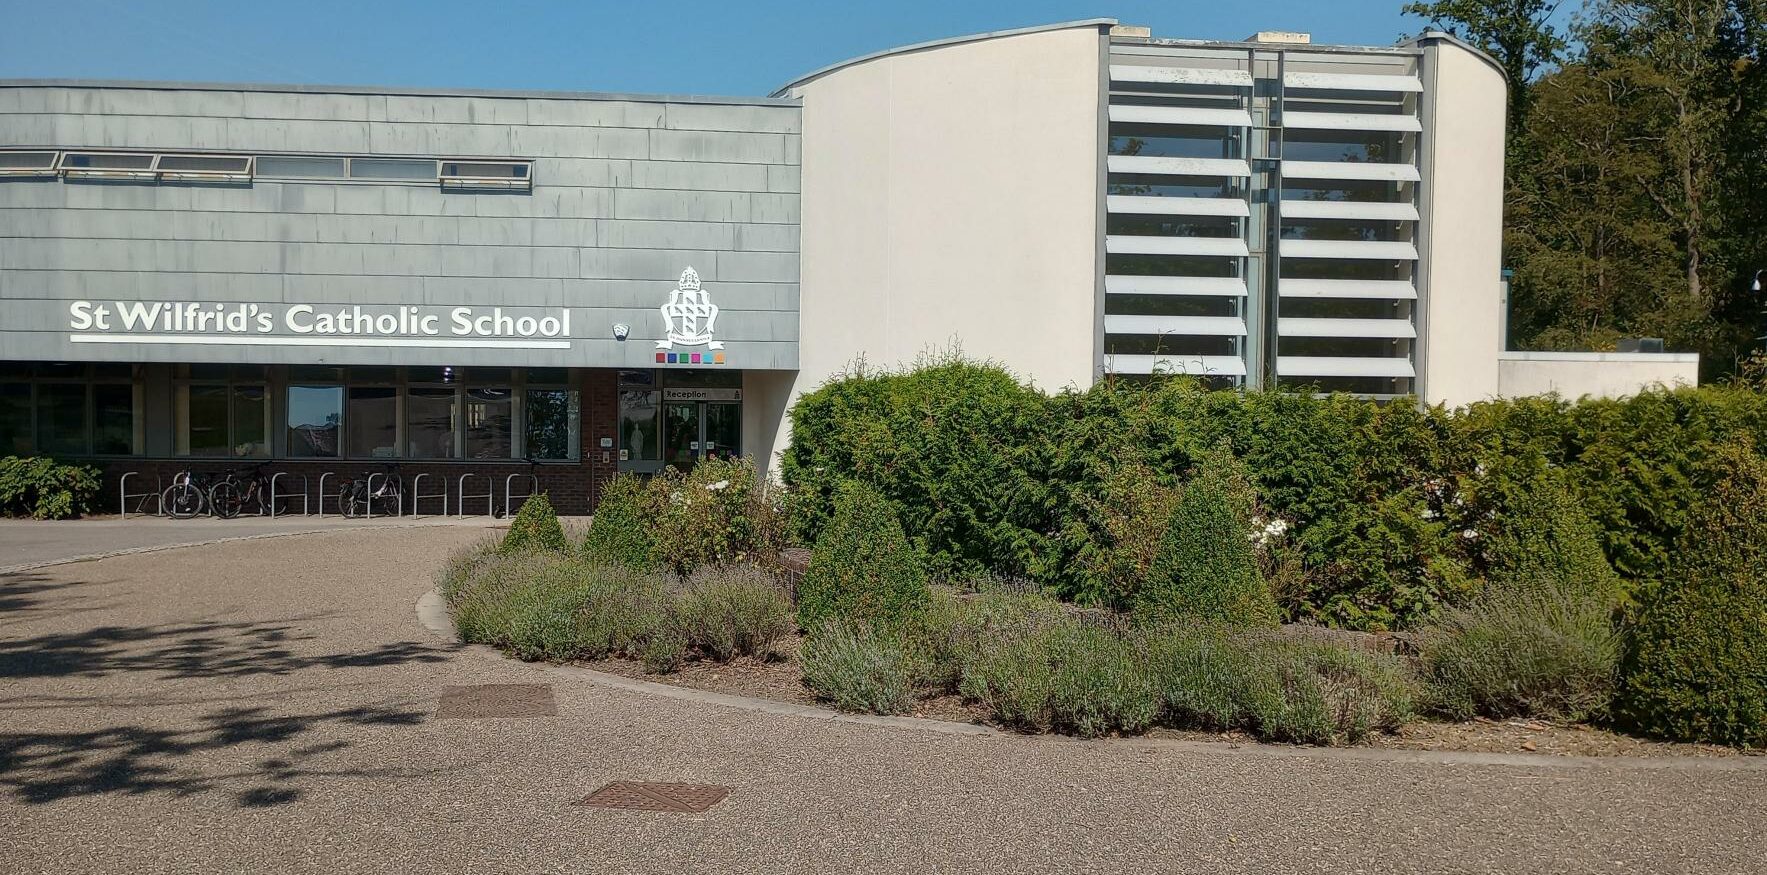 The front of St Wilfreds Catholic School, a light grey cement building with green shrubs to the right of the image